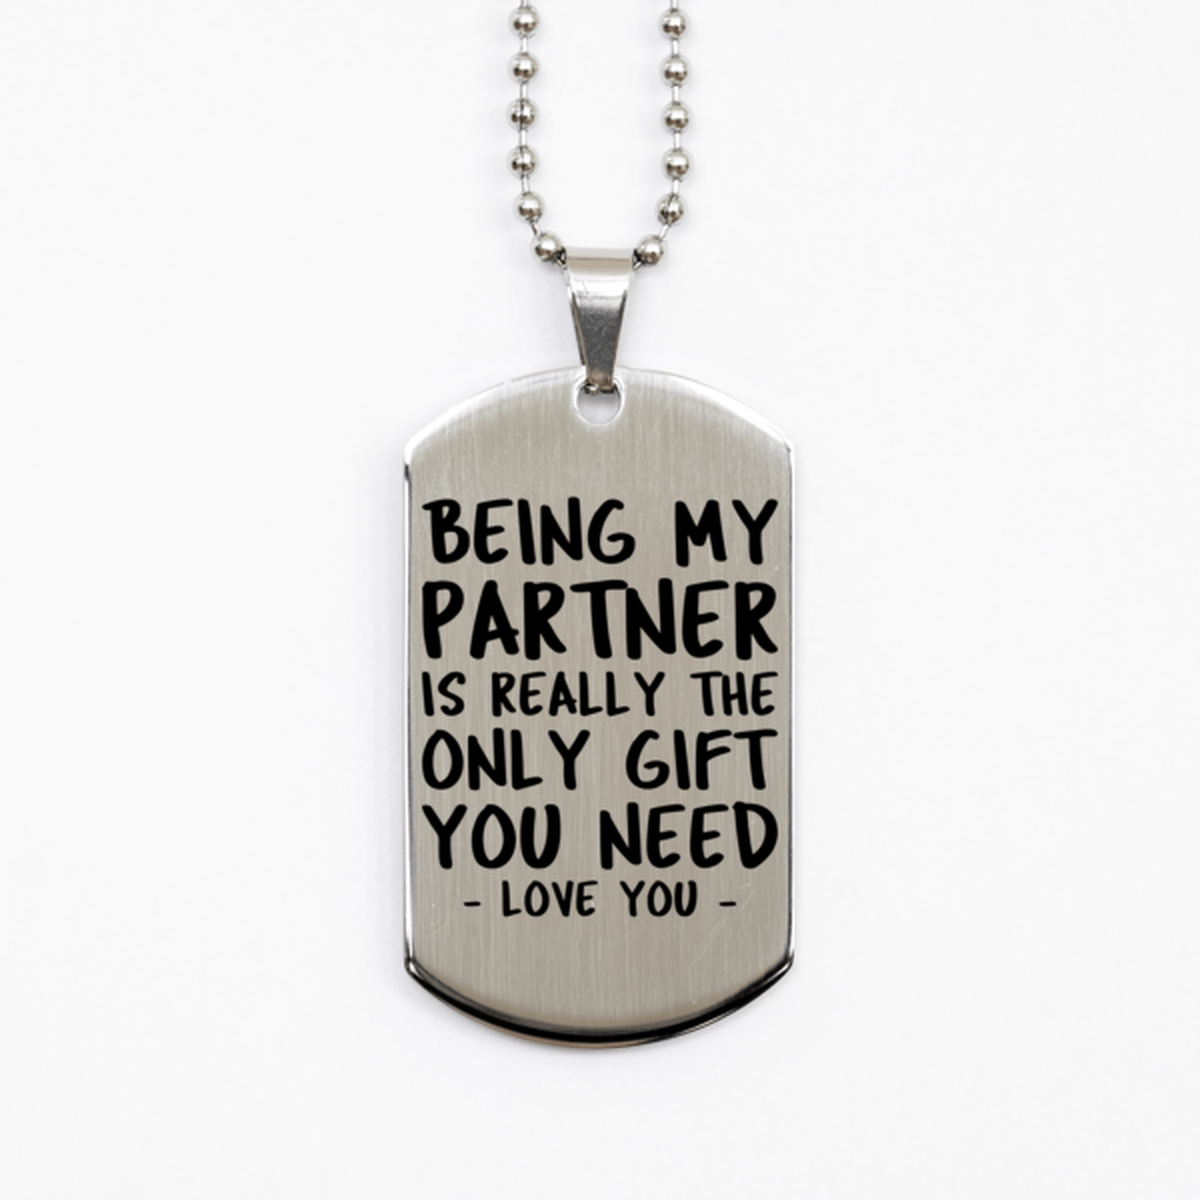 Funny Partner Silver Dog Tag Necklace, Being My Partner Is Really the Only Gift You Need, Best Birthday Gifts for Partner